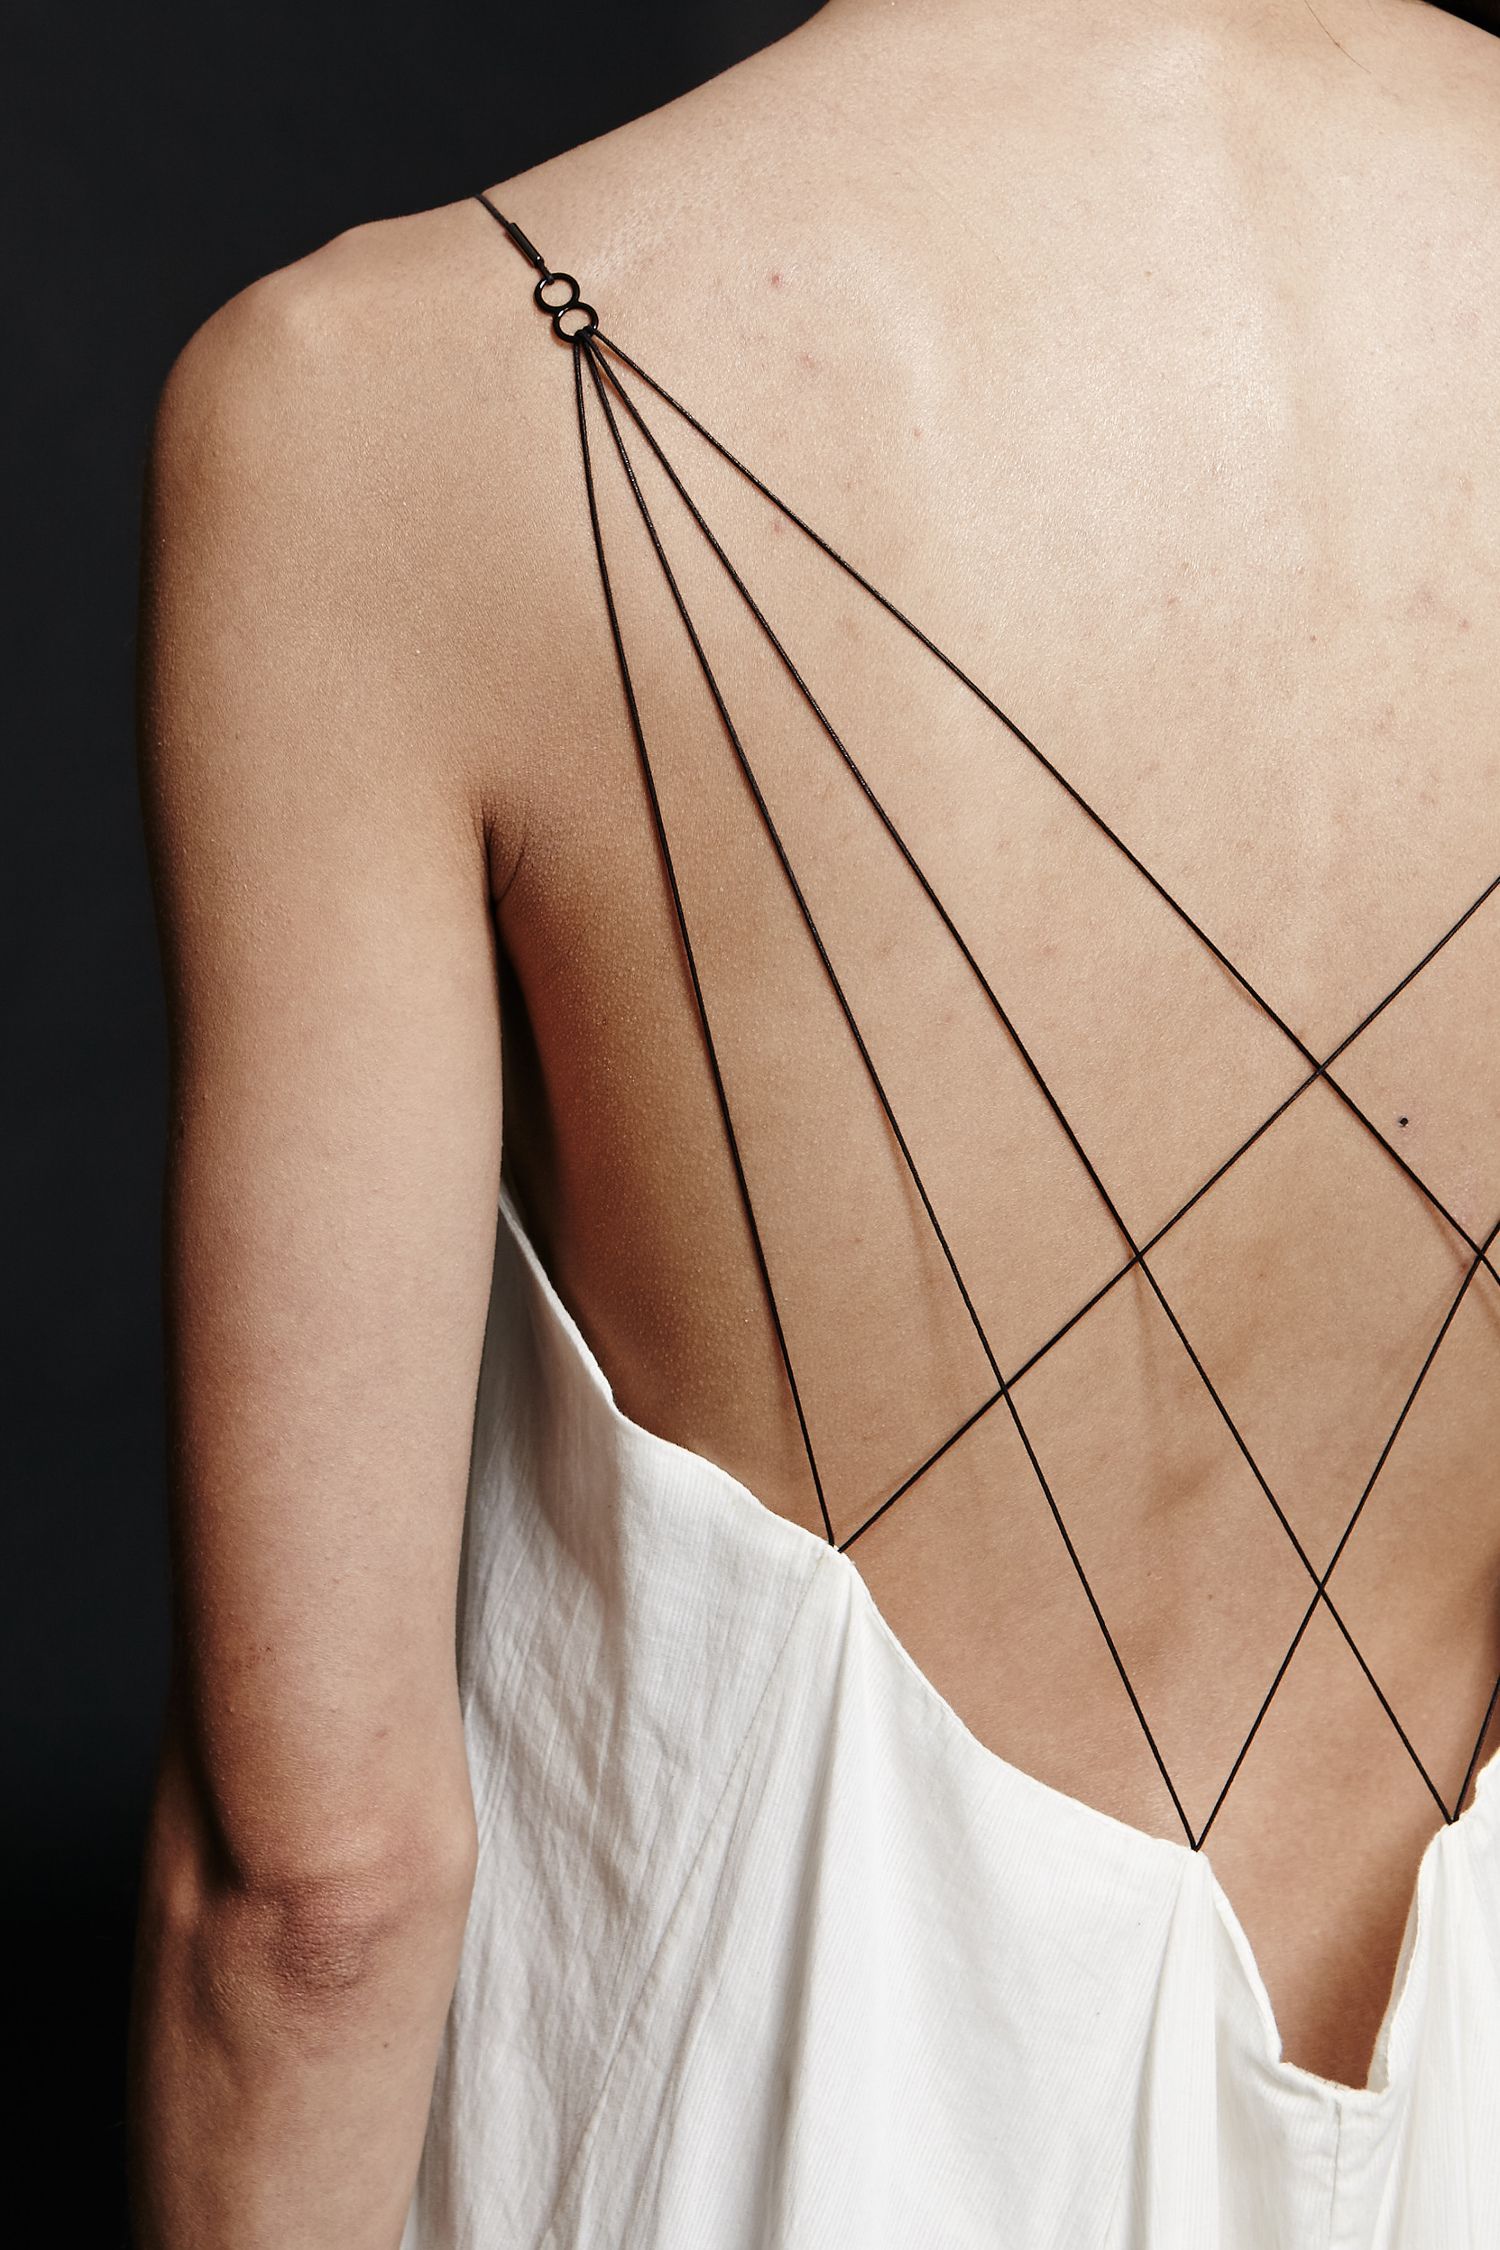 Dress back detail with dainty crisscross straps; close up fashion details // Titania Inglis | @ANDWHATELSEISTHERE